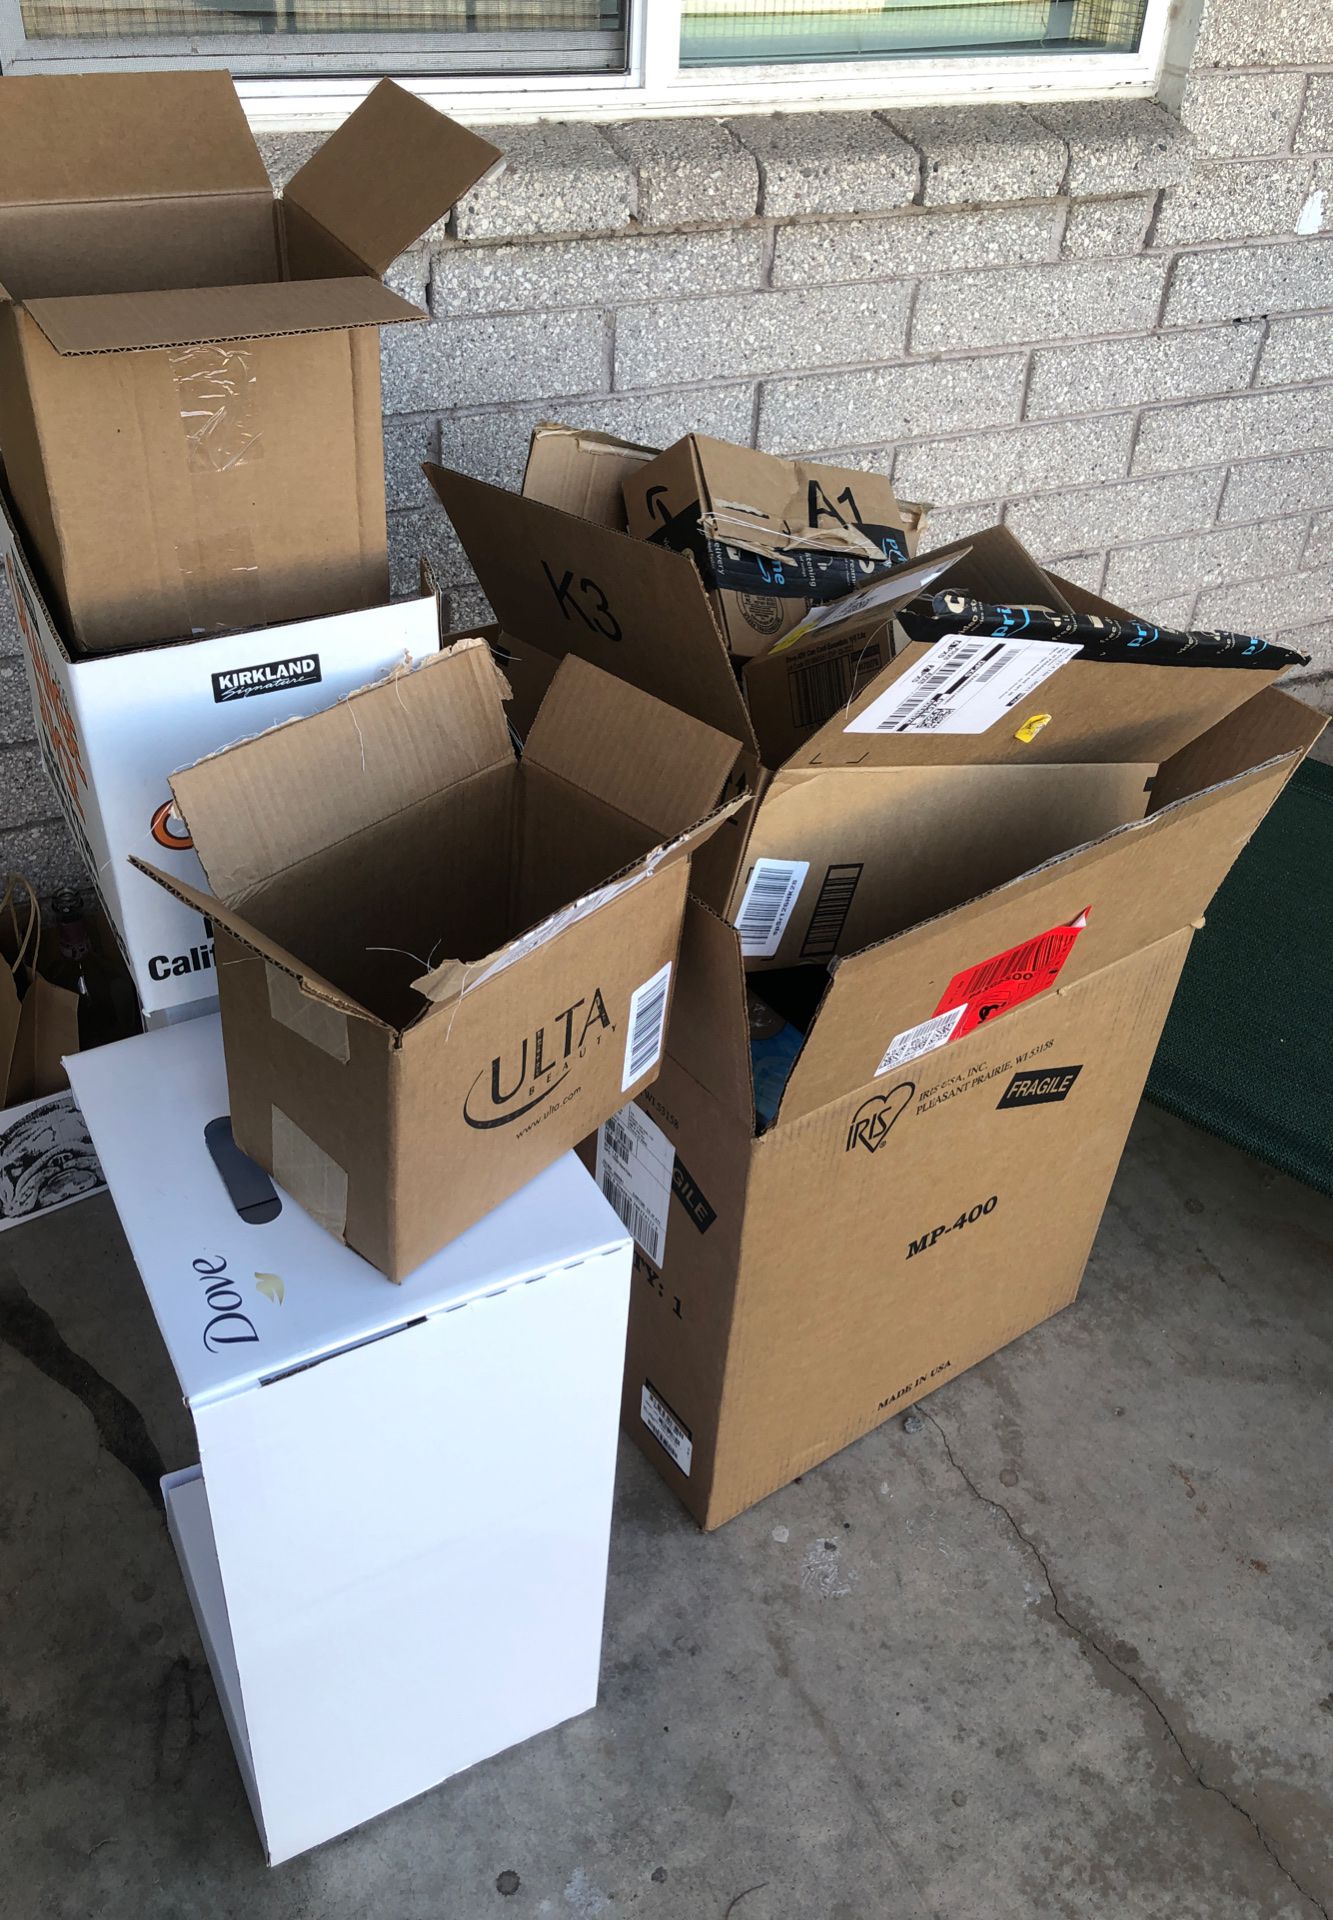 Assorted cardboard boxes